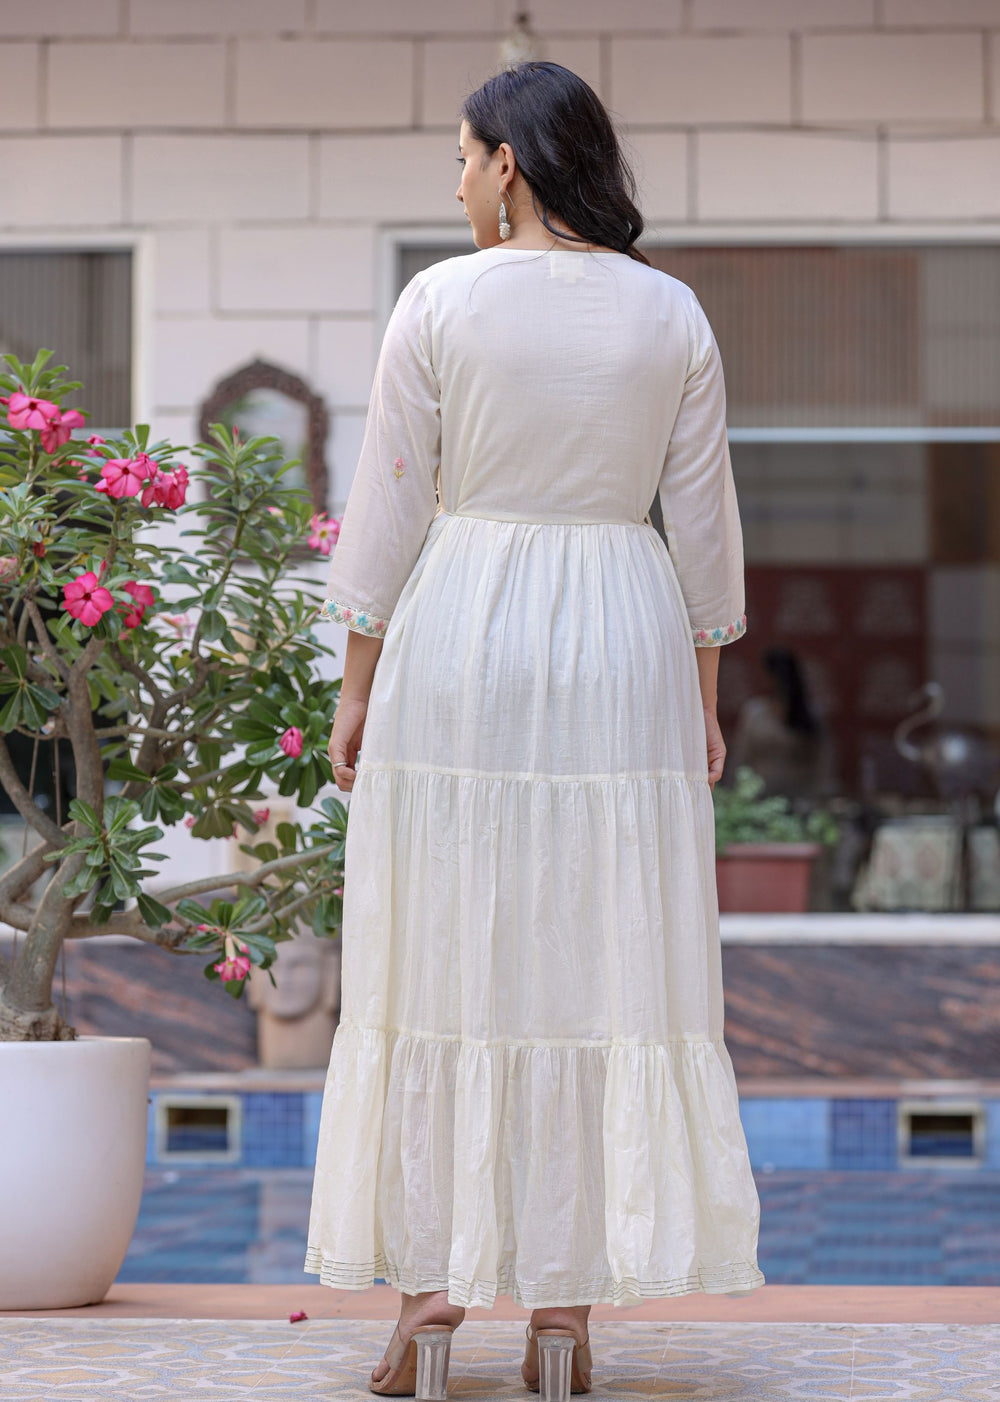 Buy a White Ethnic Dress for Women Online | Best Designer Ethnic Gown in India